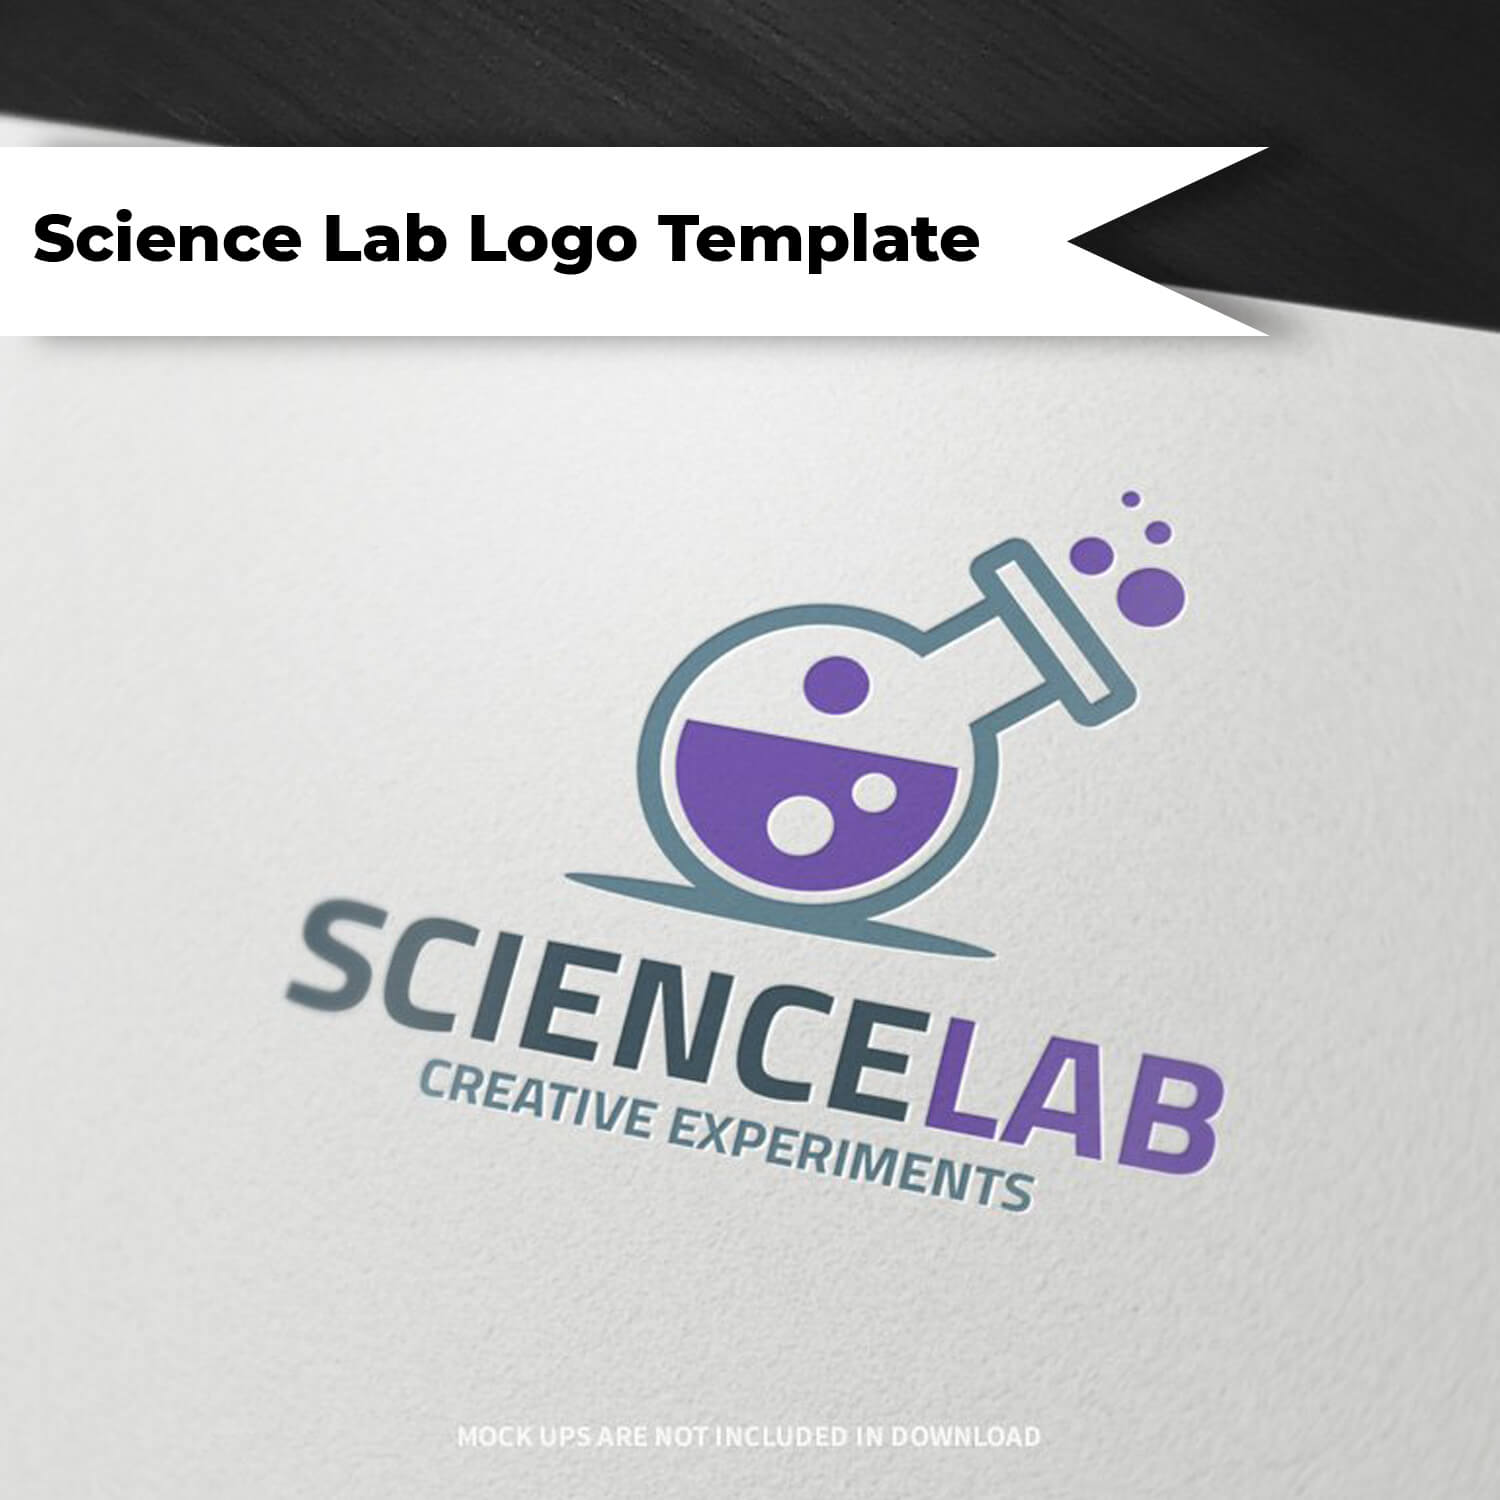 Science lab logo template are not included in download.